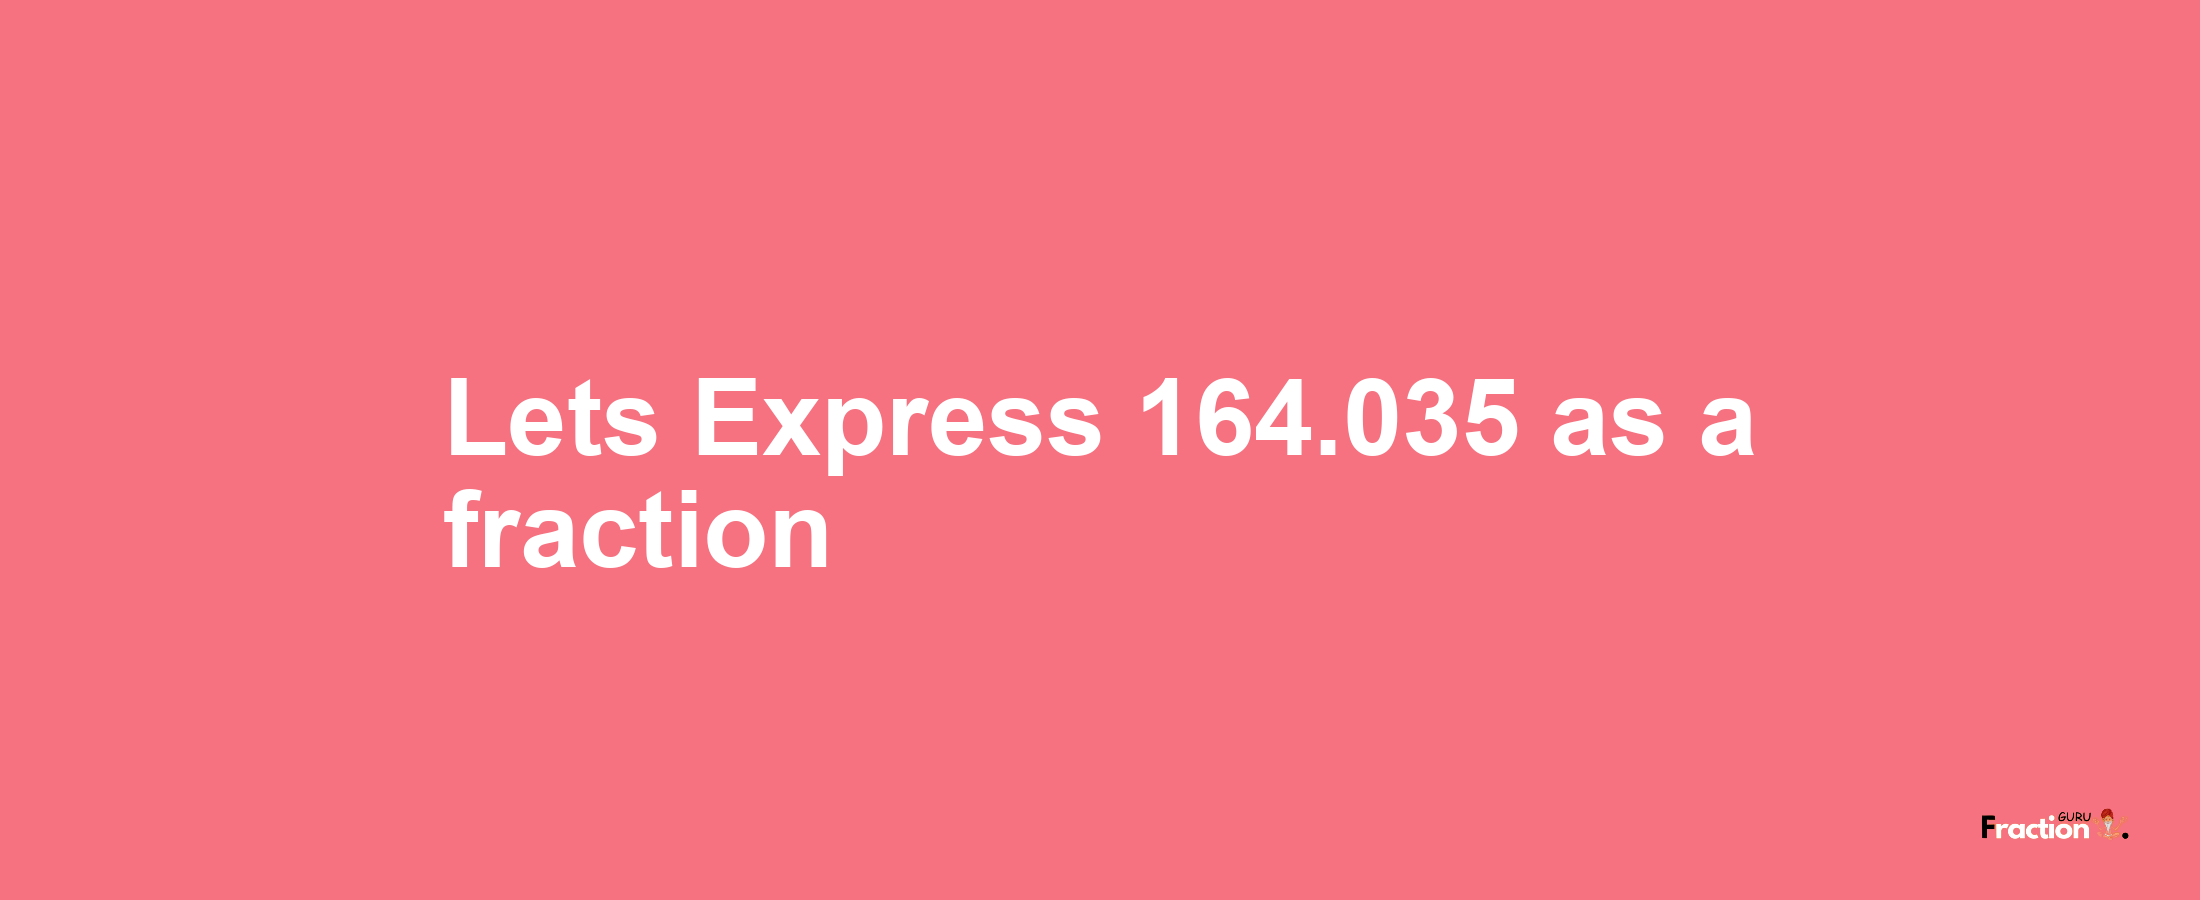 Lets Express 164.035 as afraction